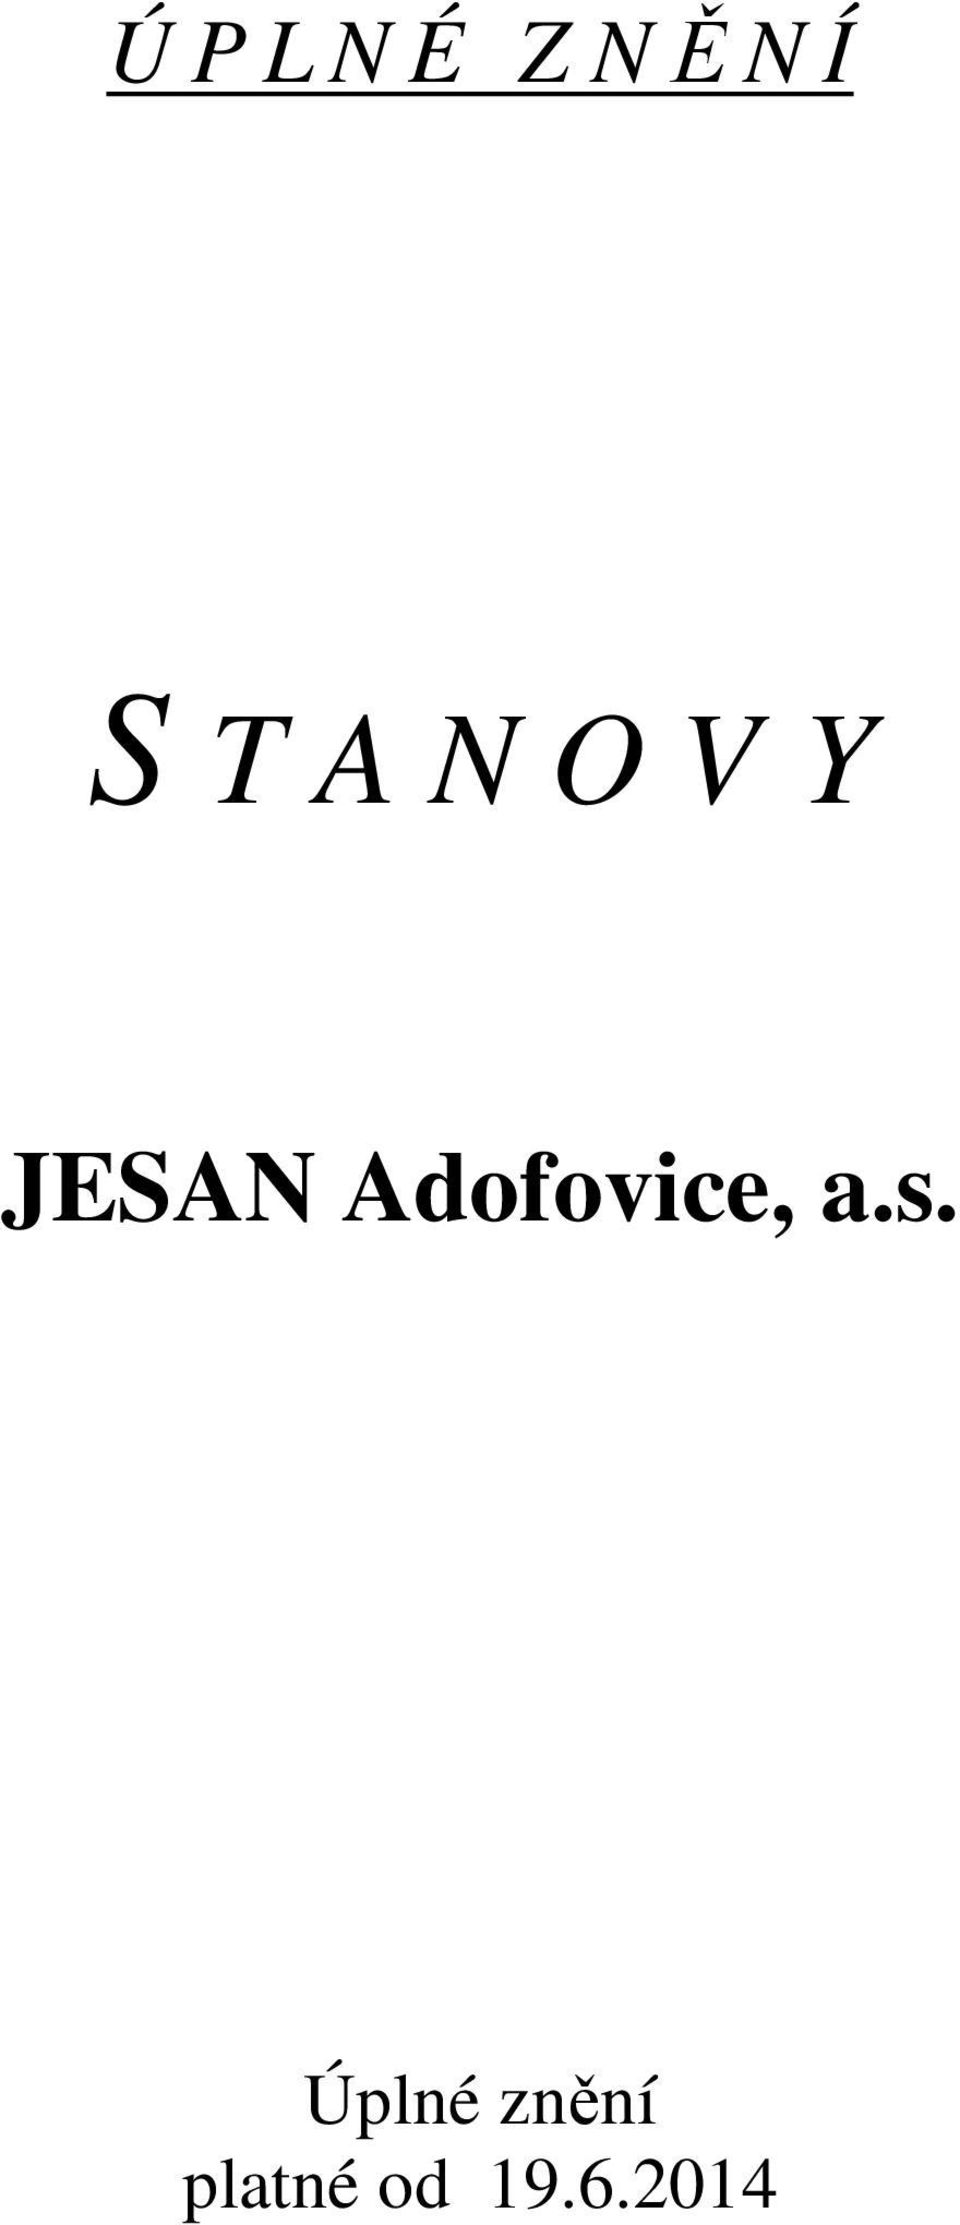 Adofovice, a.s.